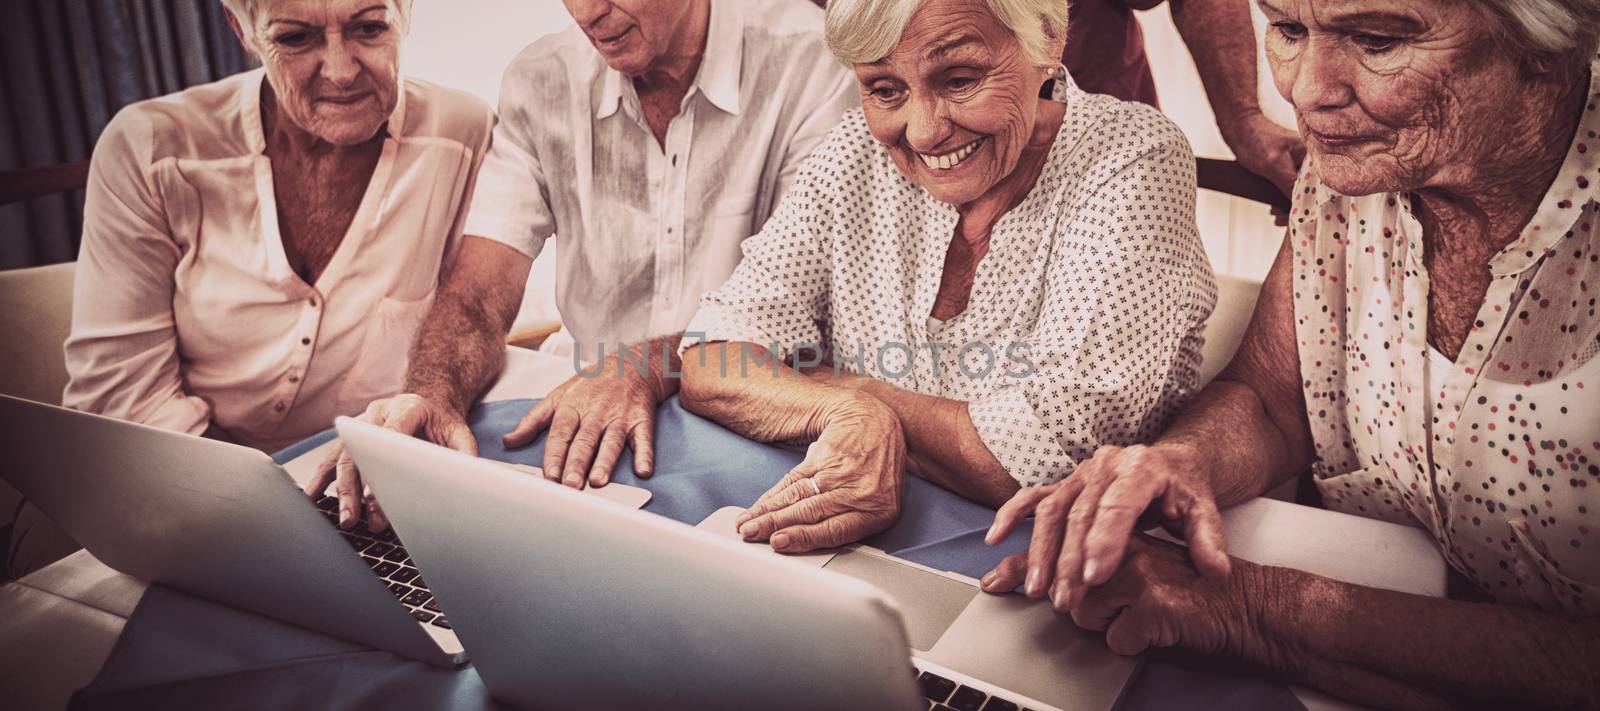 Group of seniors using a laptop in the house